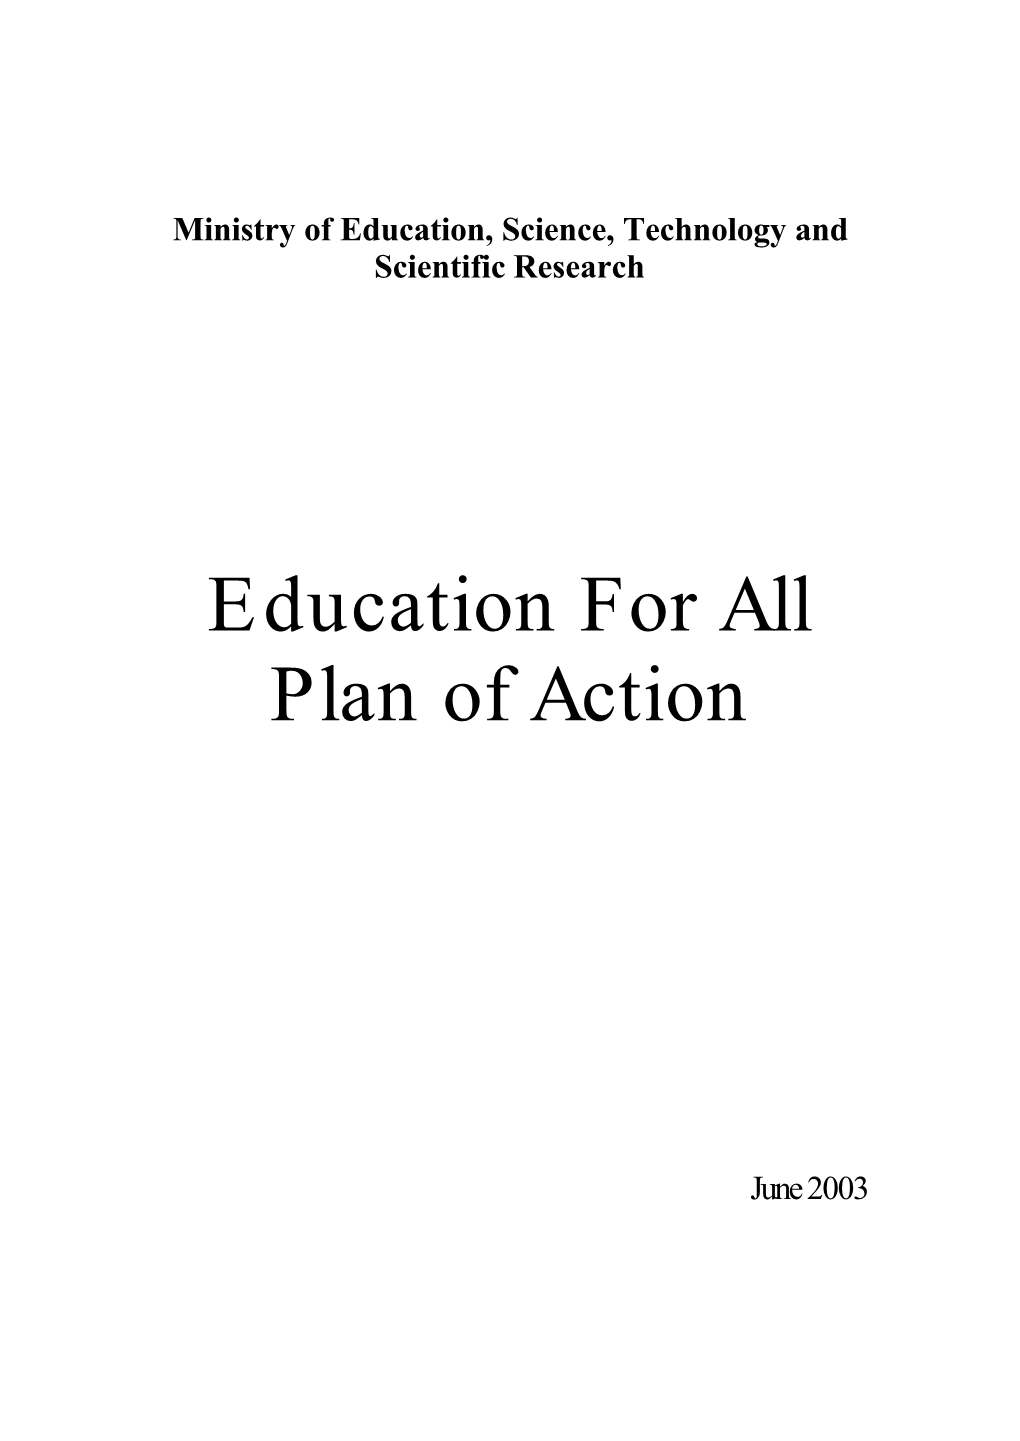 Education for All Plan of Action